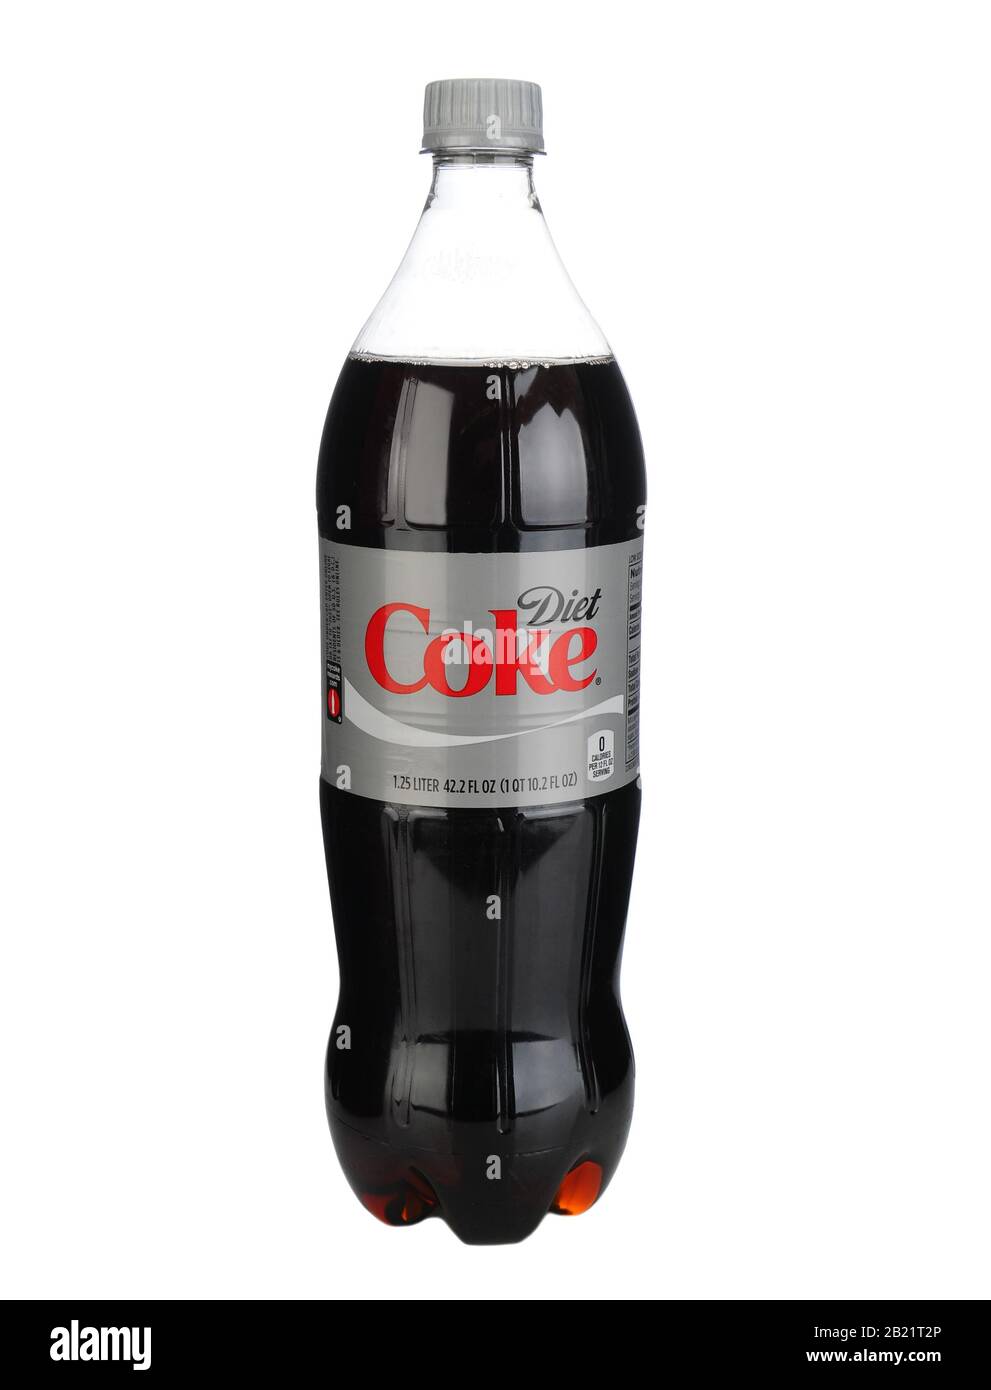 IRVINE, CA - January 11, 2013: A 1.25 Liter bottle of Diet Coke. Introduced in the US on August 9, 1982, it was the first new brand since 1886 to use Stock Photo